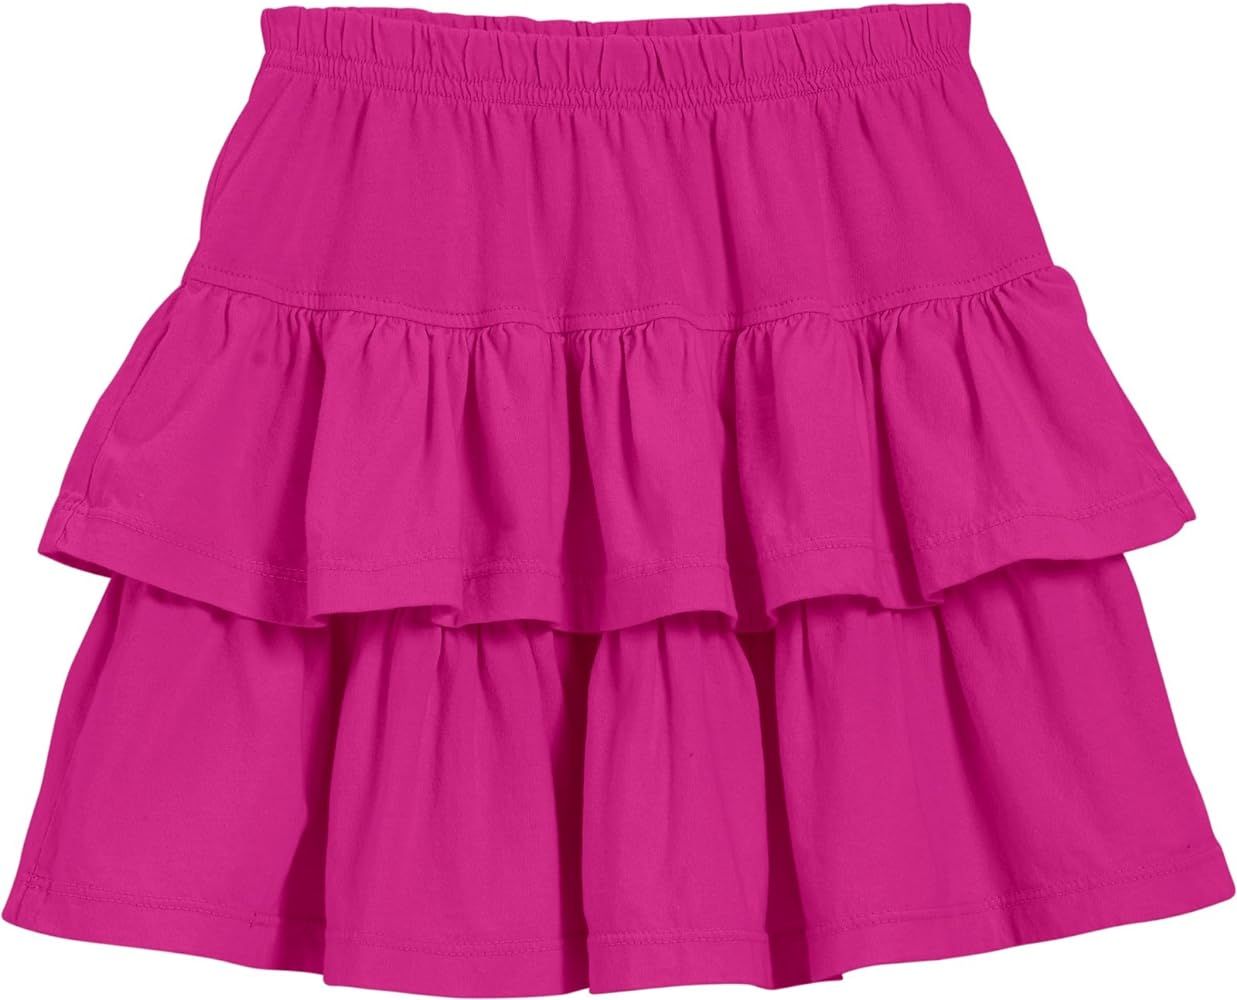 Girls' Soft 100% Cotton Tiered Skirt for School or Play MADE IN USA | Amazon (US)